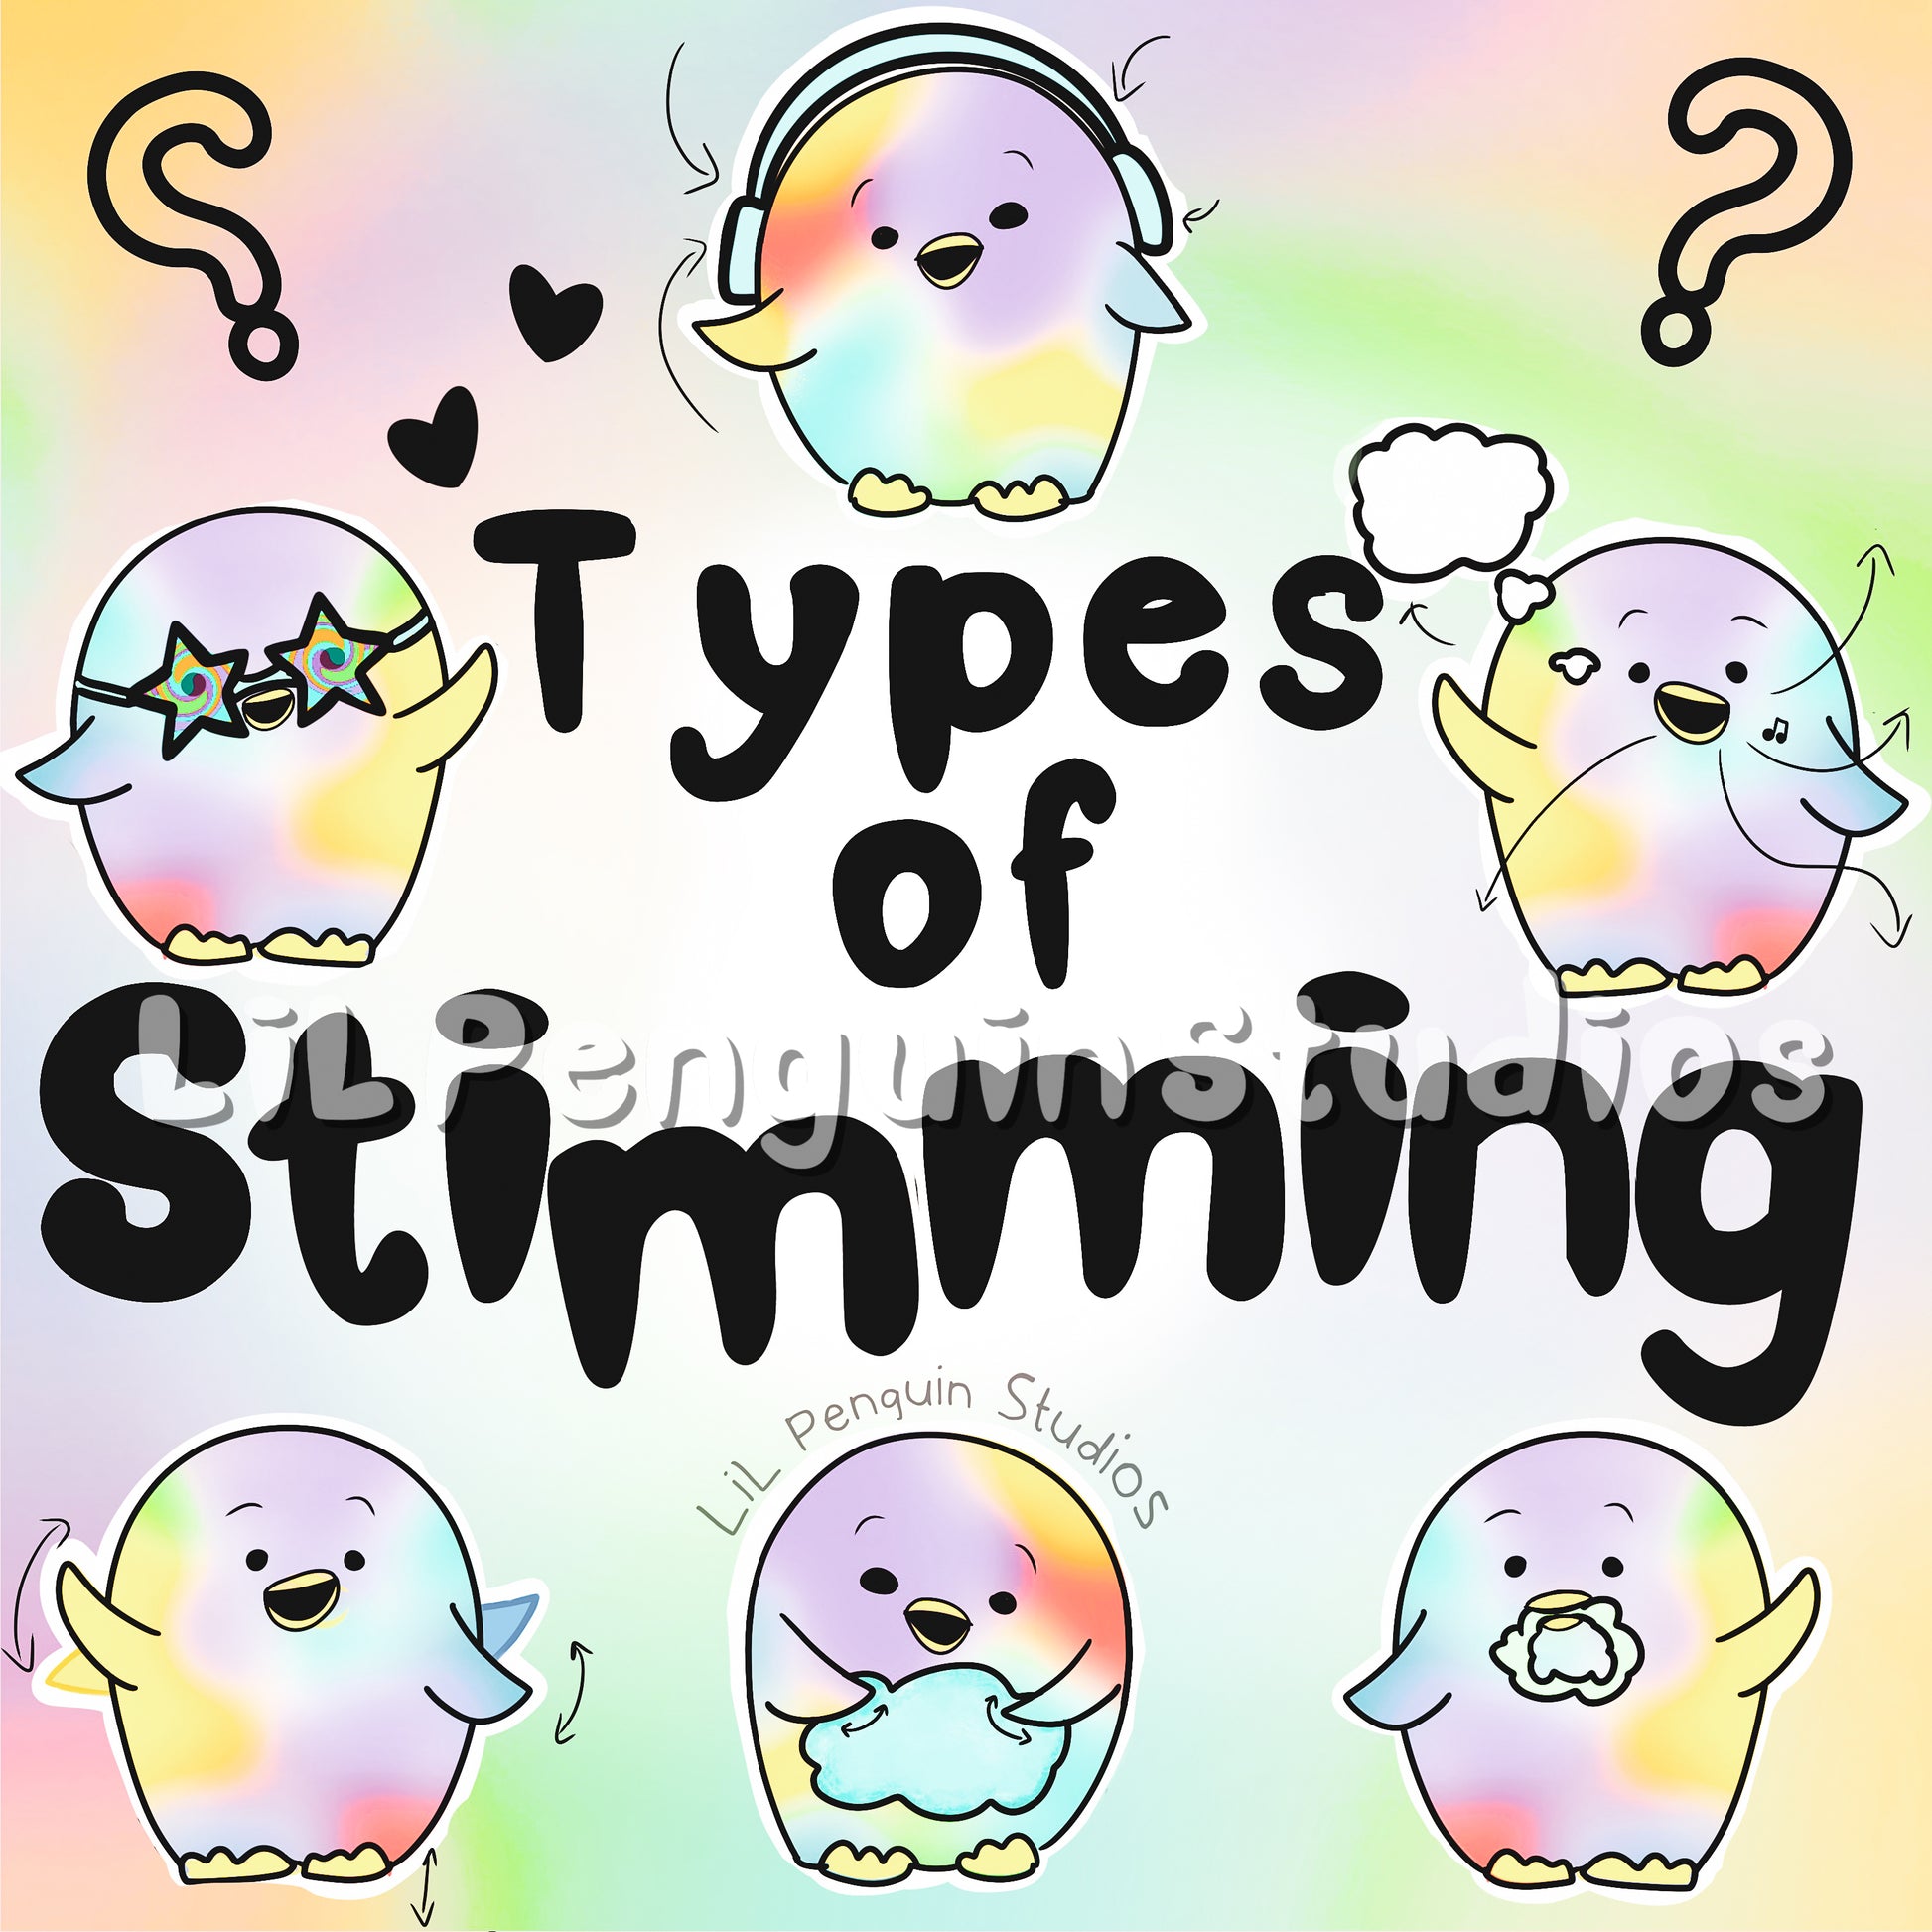 Types of Stimming Digital Print Set (PDF and JPEG) with blank worksheets. Great for neurodiversity affirming child therapists, SLPs, school counselors, special needs teachers, and of course autistic people, ADHDers, and other neurodivergent people and their loved ones.